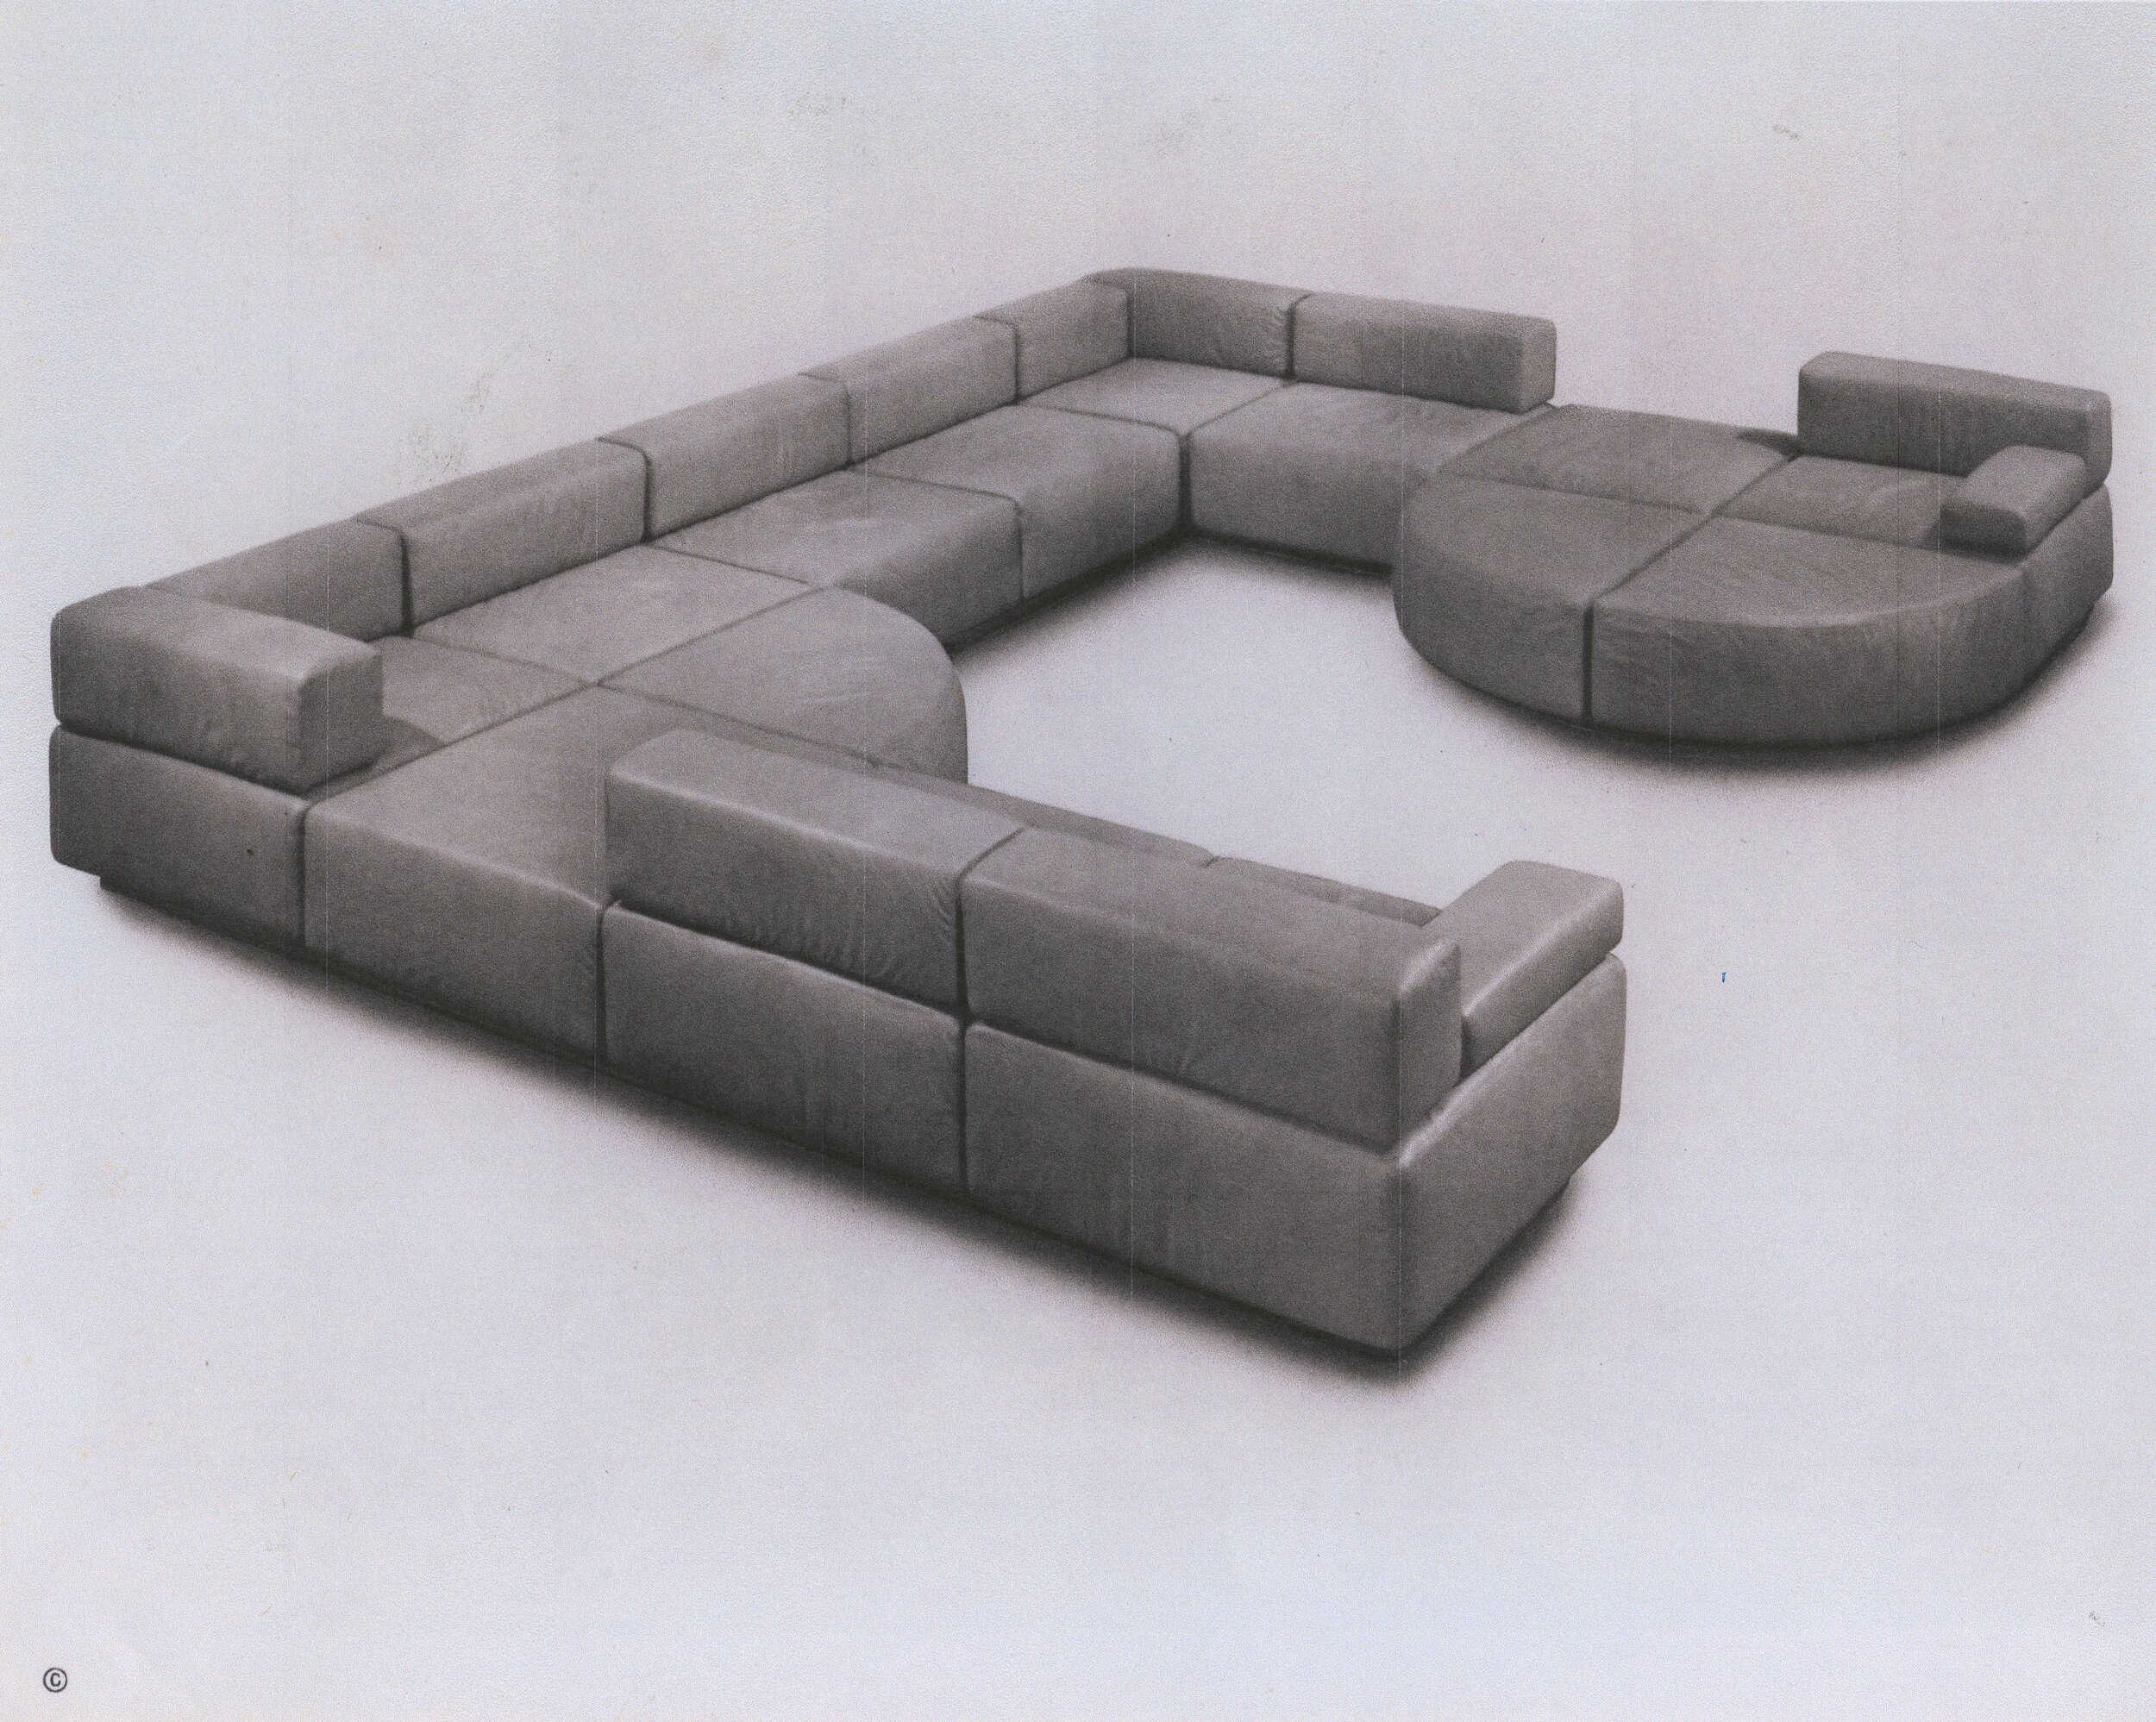 Cubo modular seating collection, steel-reinforced foam squares and quadrants that can be rearranged in different configurations and mounted on either legs or bases, 1972.